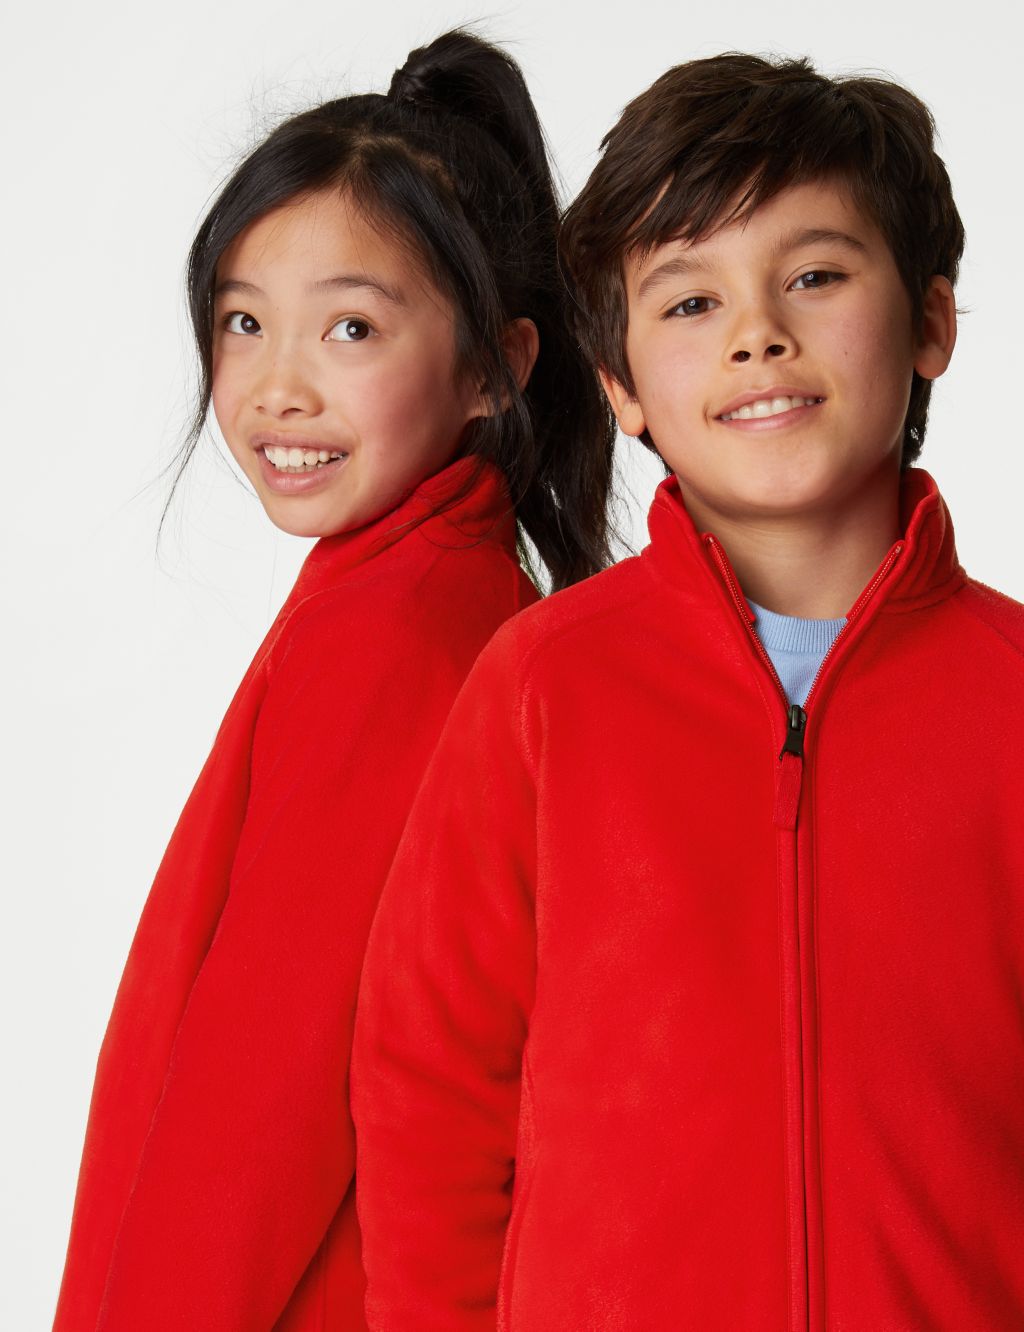 Shop GOODMOVE Kids' Clothes up to 75% Off